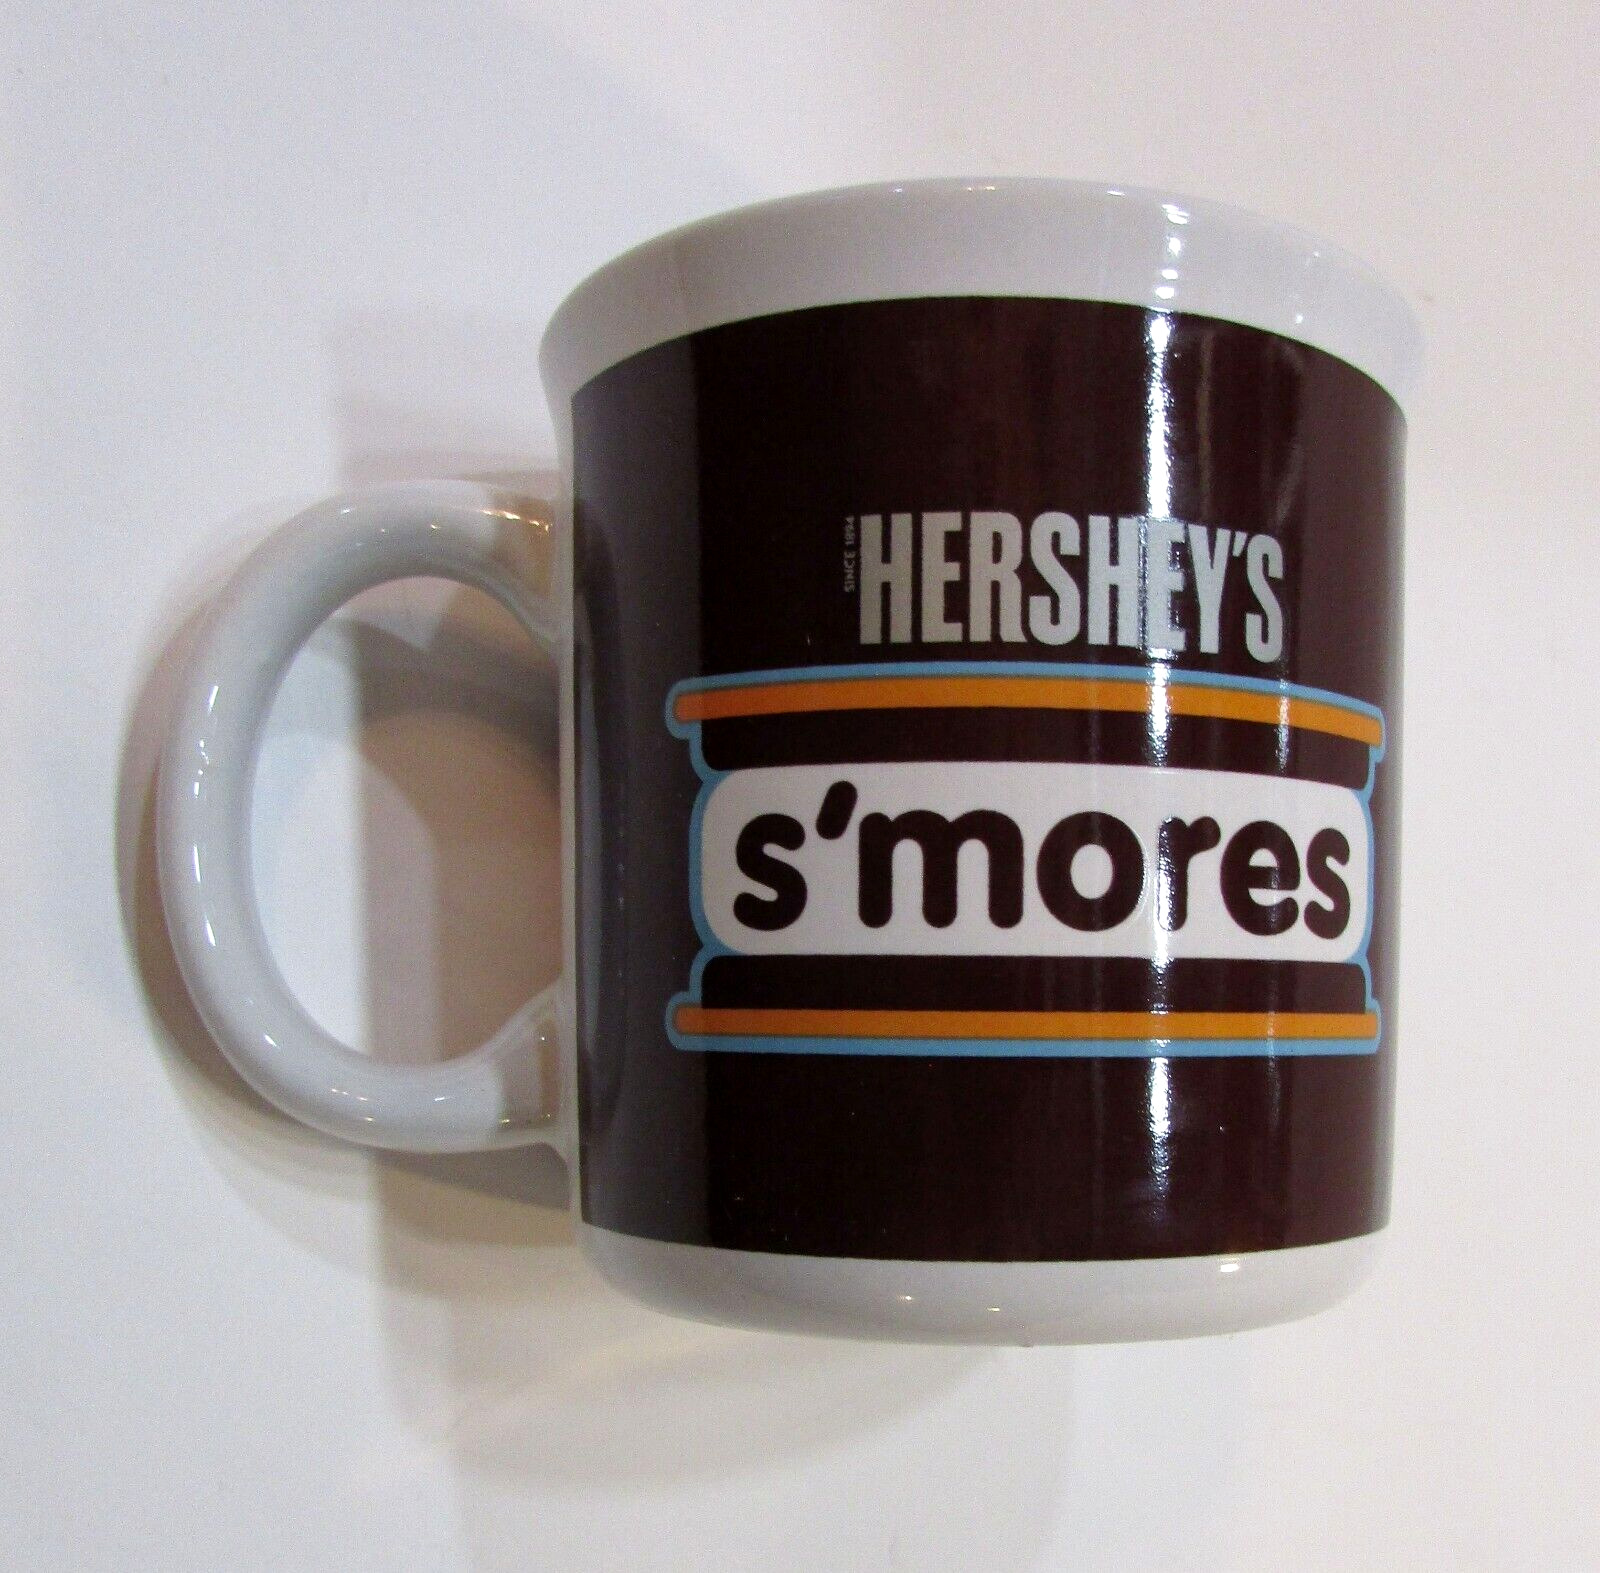 Old 2010's Hershey’s S’mores Vintage Porcelain Coffee Cup Cocoa Mug from Galerie